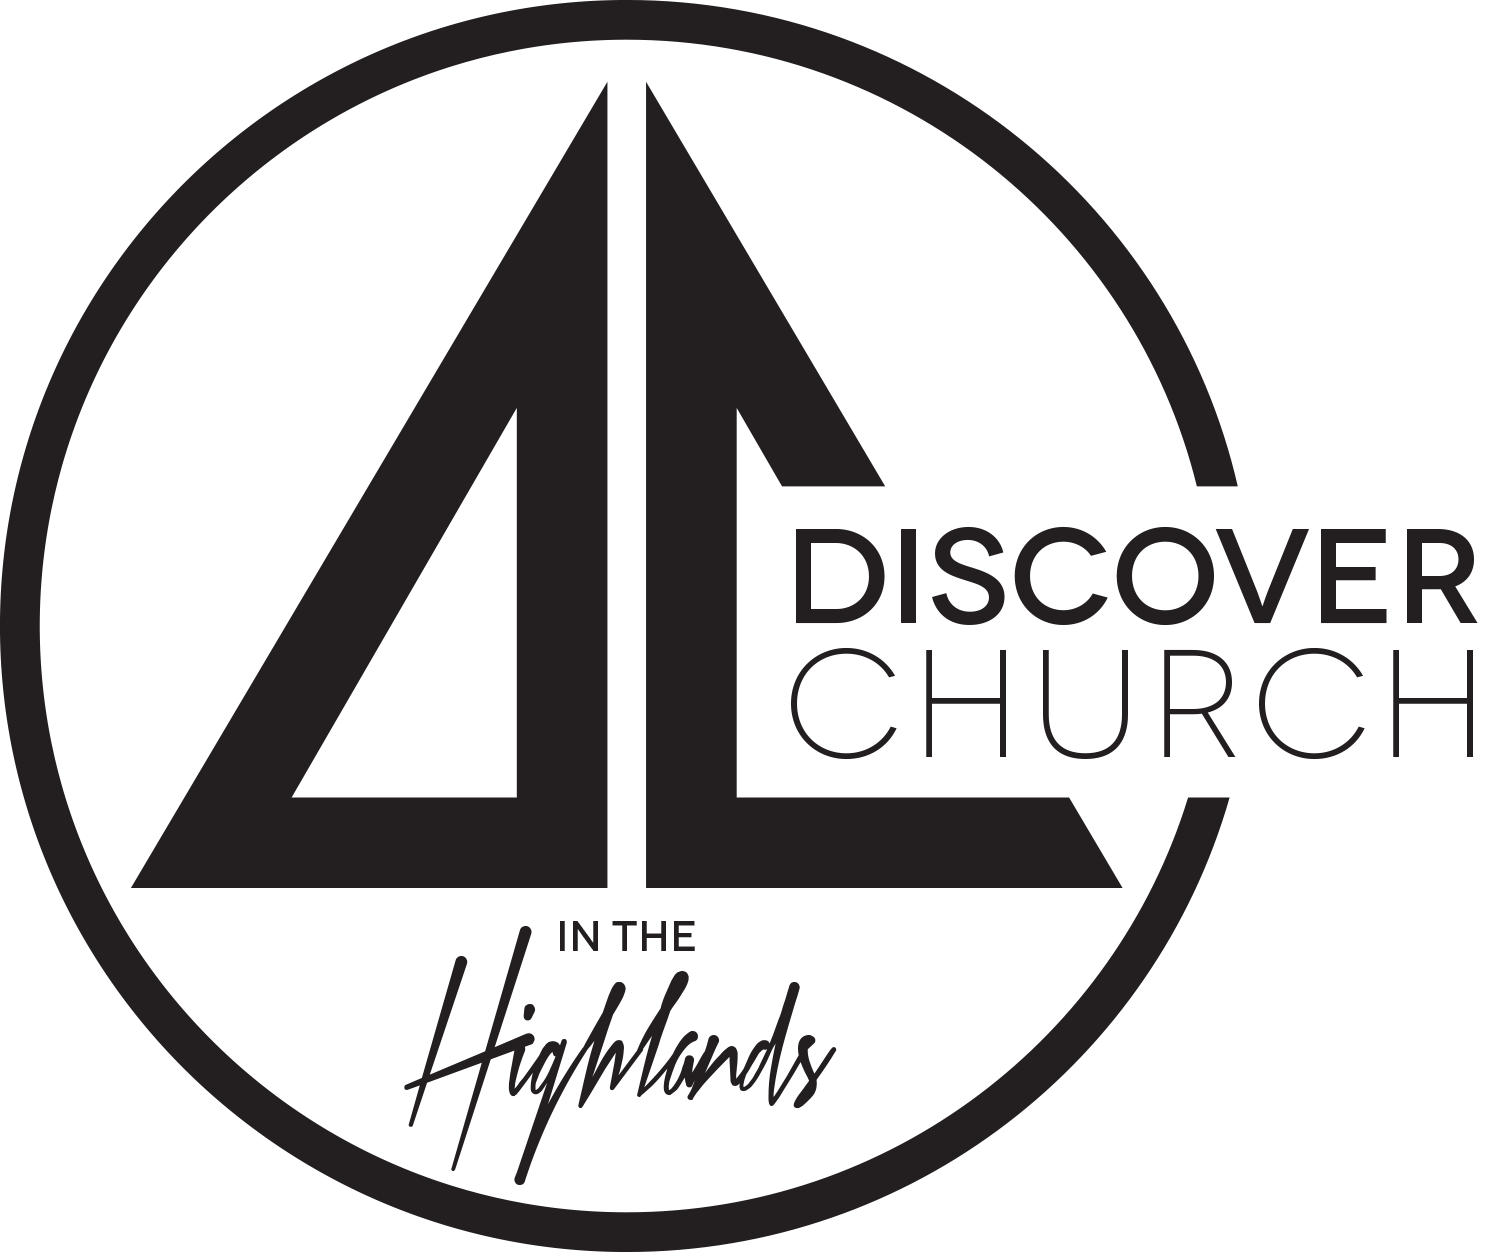 Discover Church in the Highlands